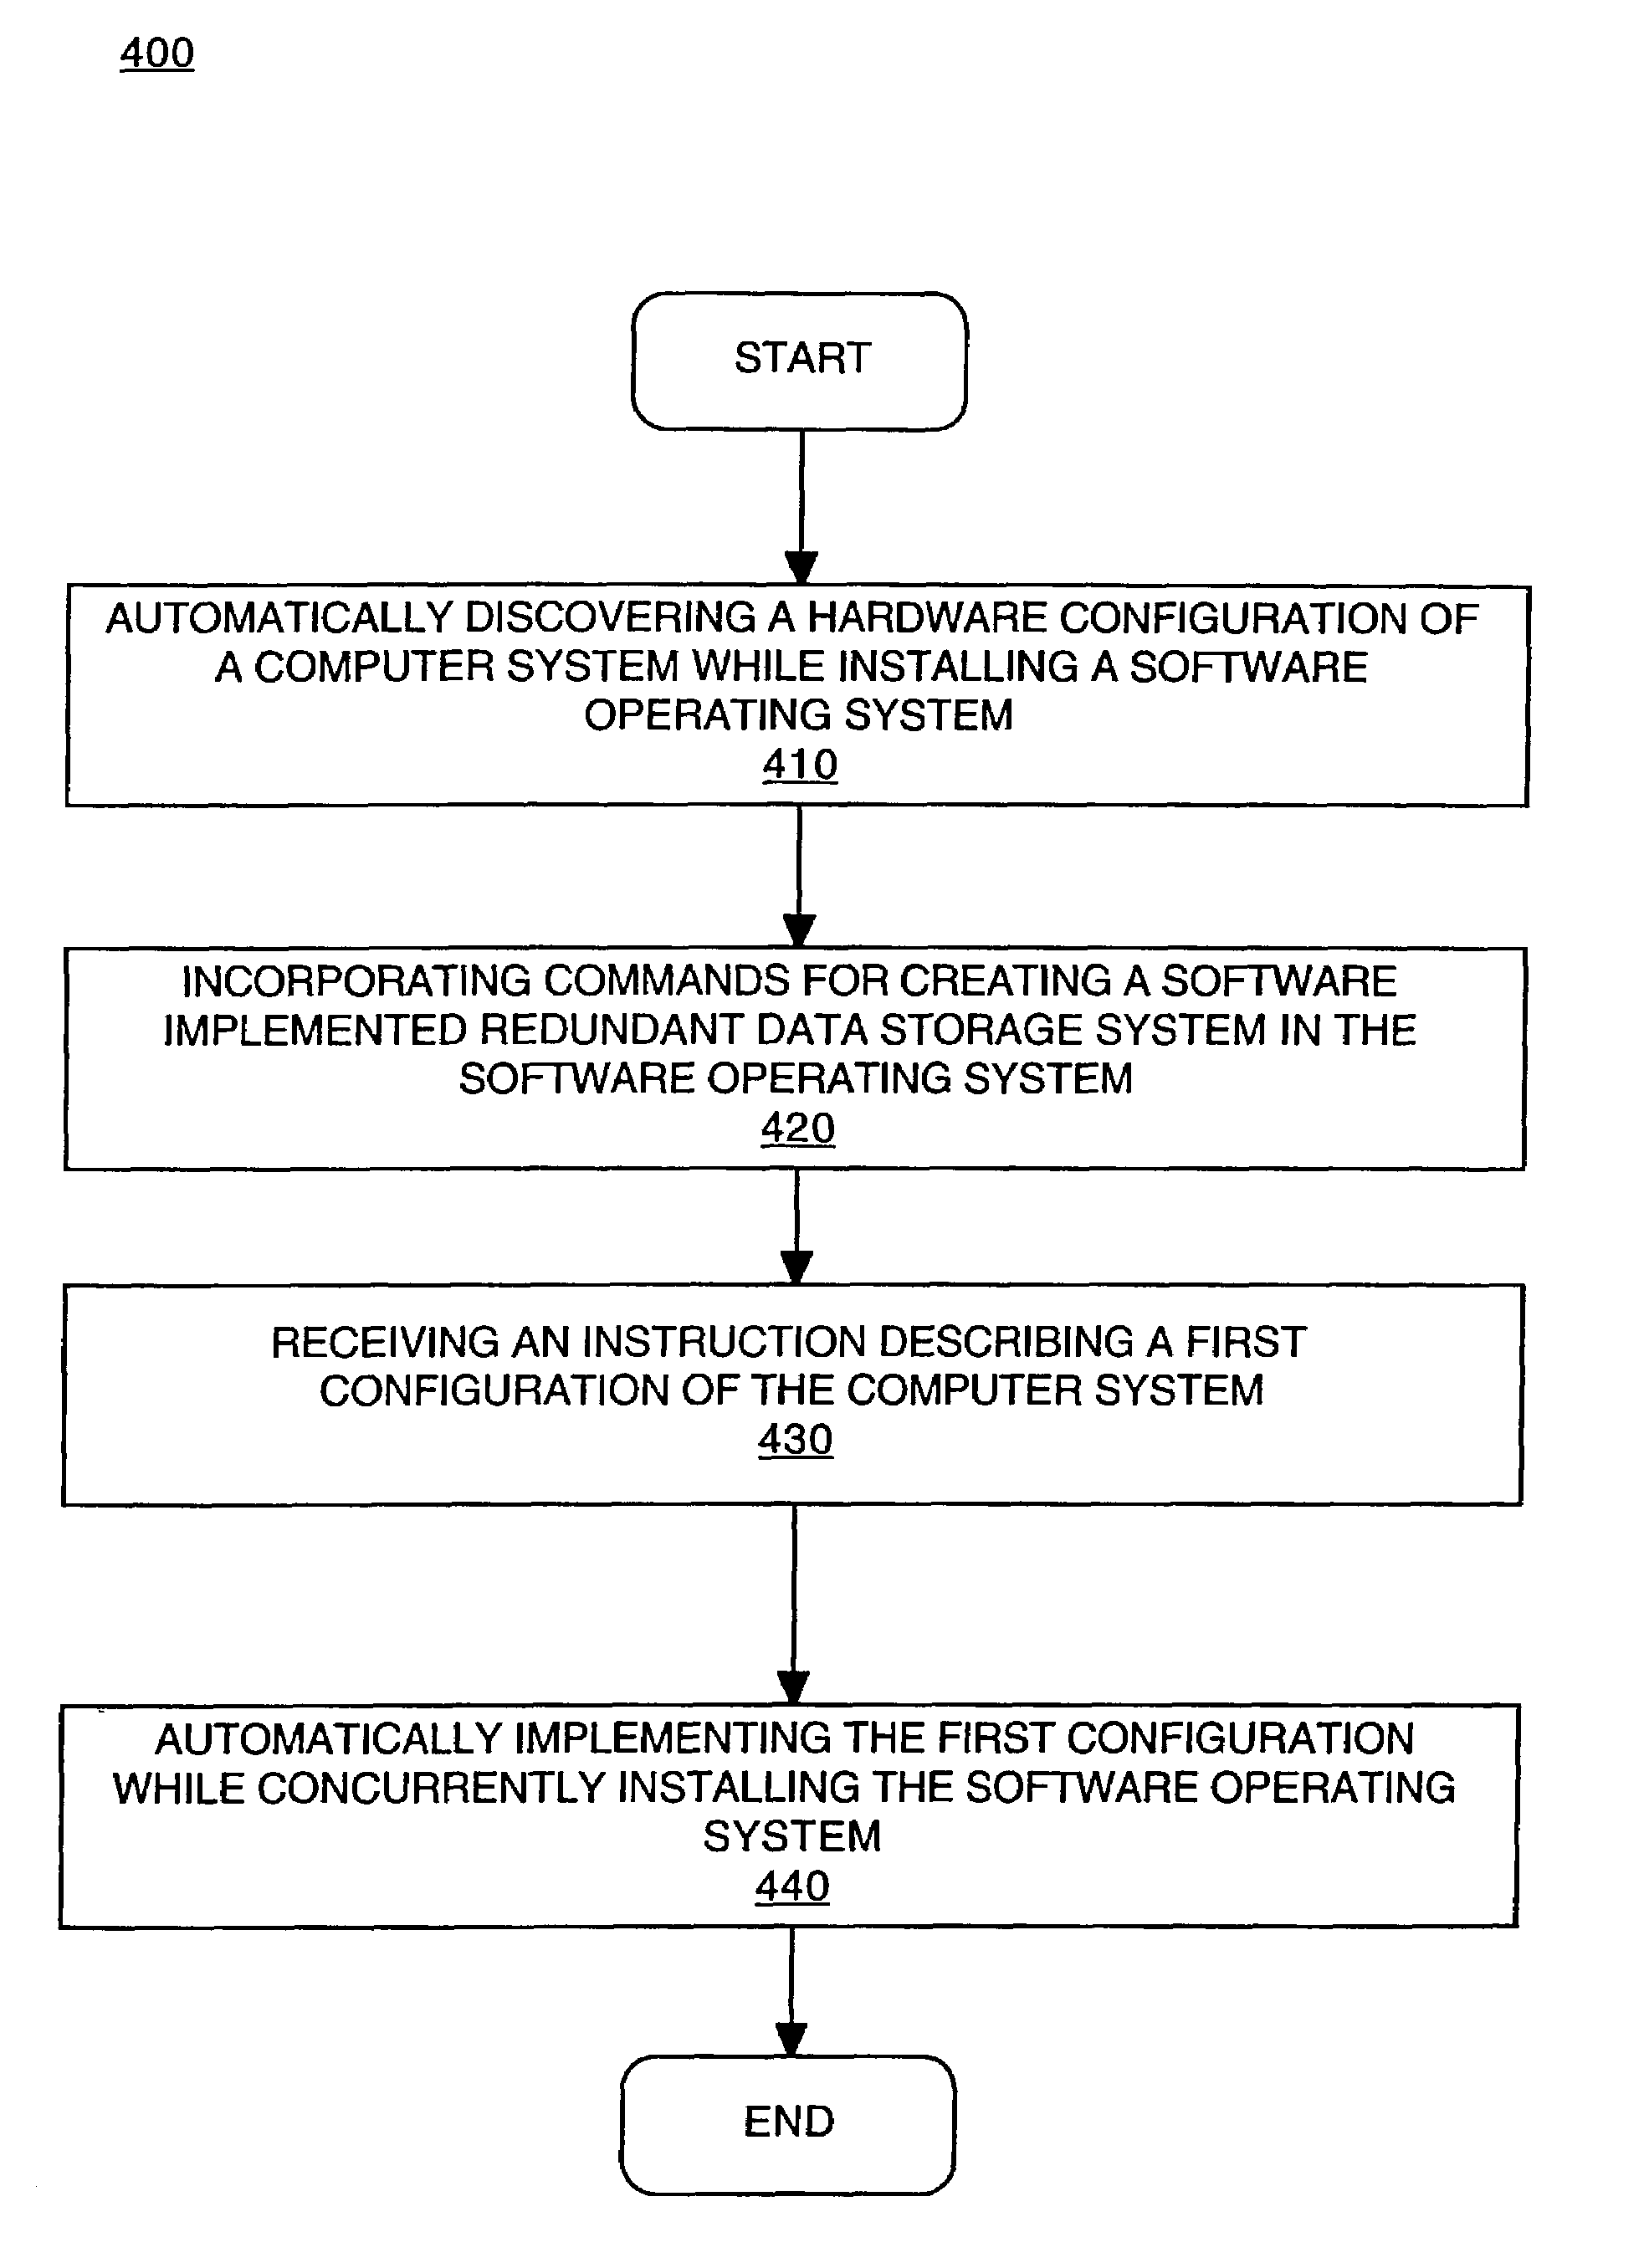 Method for implementing a redundant data storage system